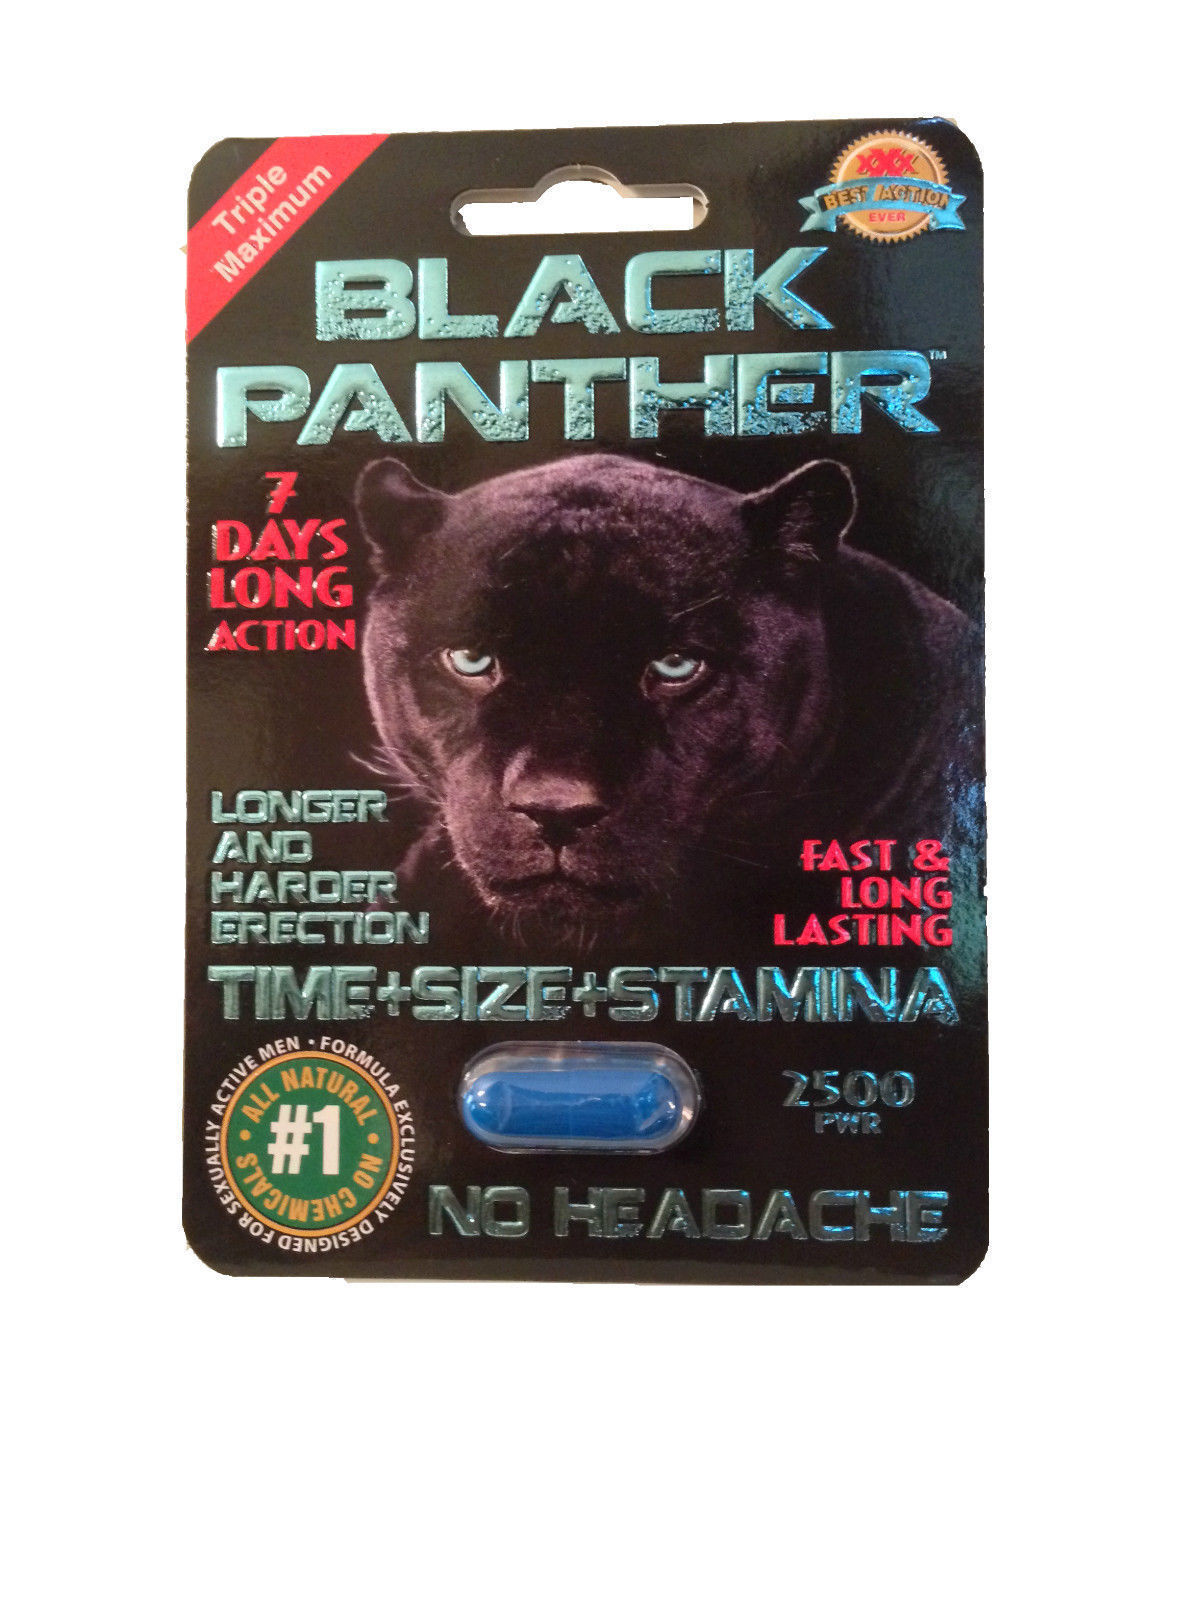 Black Panther Male Enhancement: 1 customer review and 3 ...